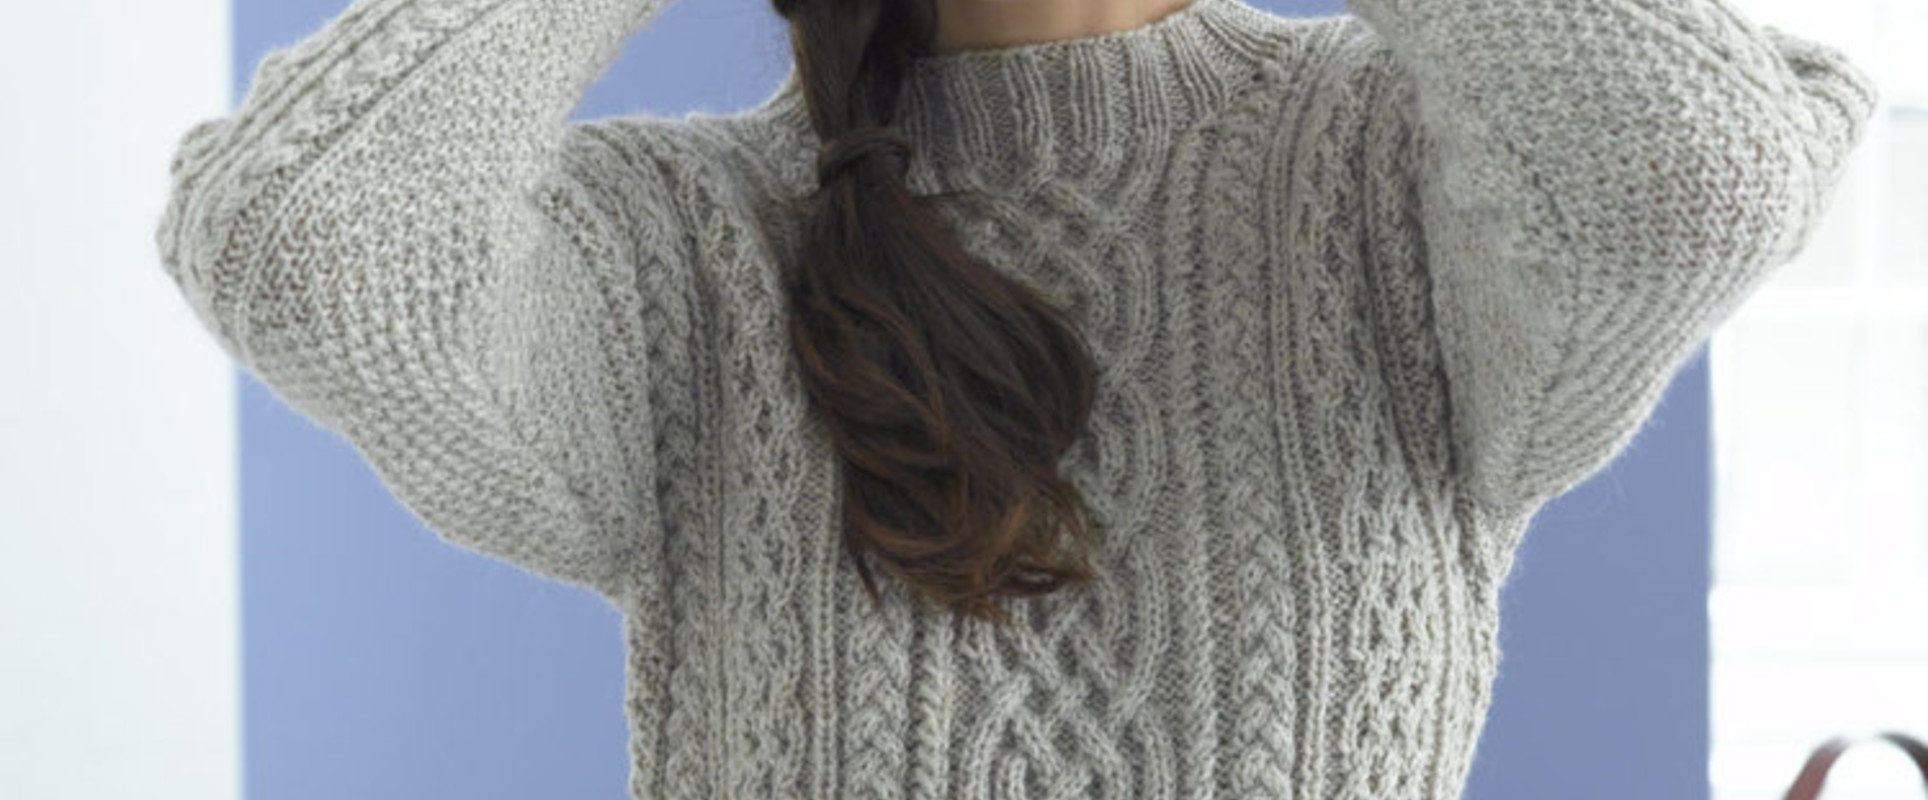 Free Sweater Patterns To Knit Top 5 Free Aran Jumper Knitting Patterns For Women Lovecrafts